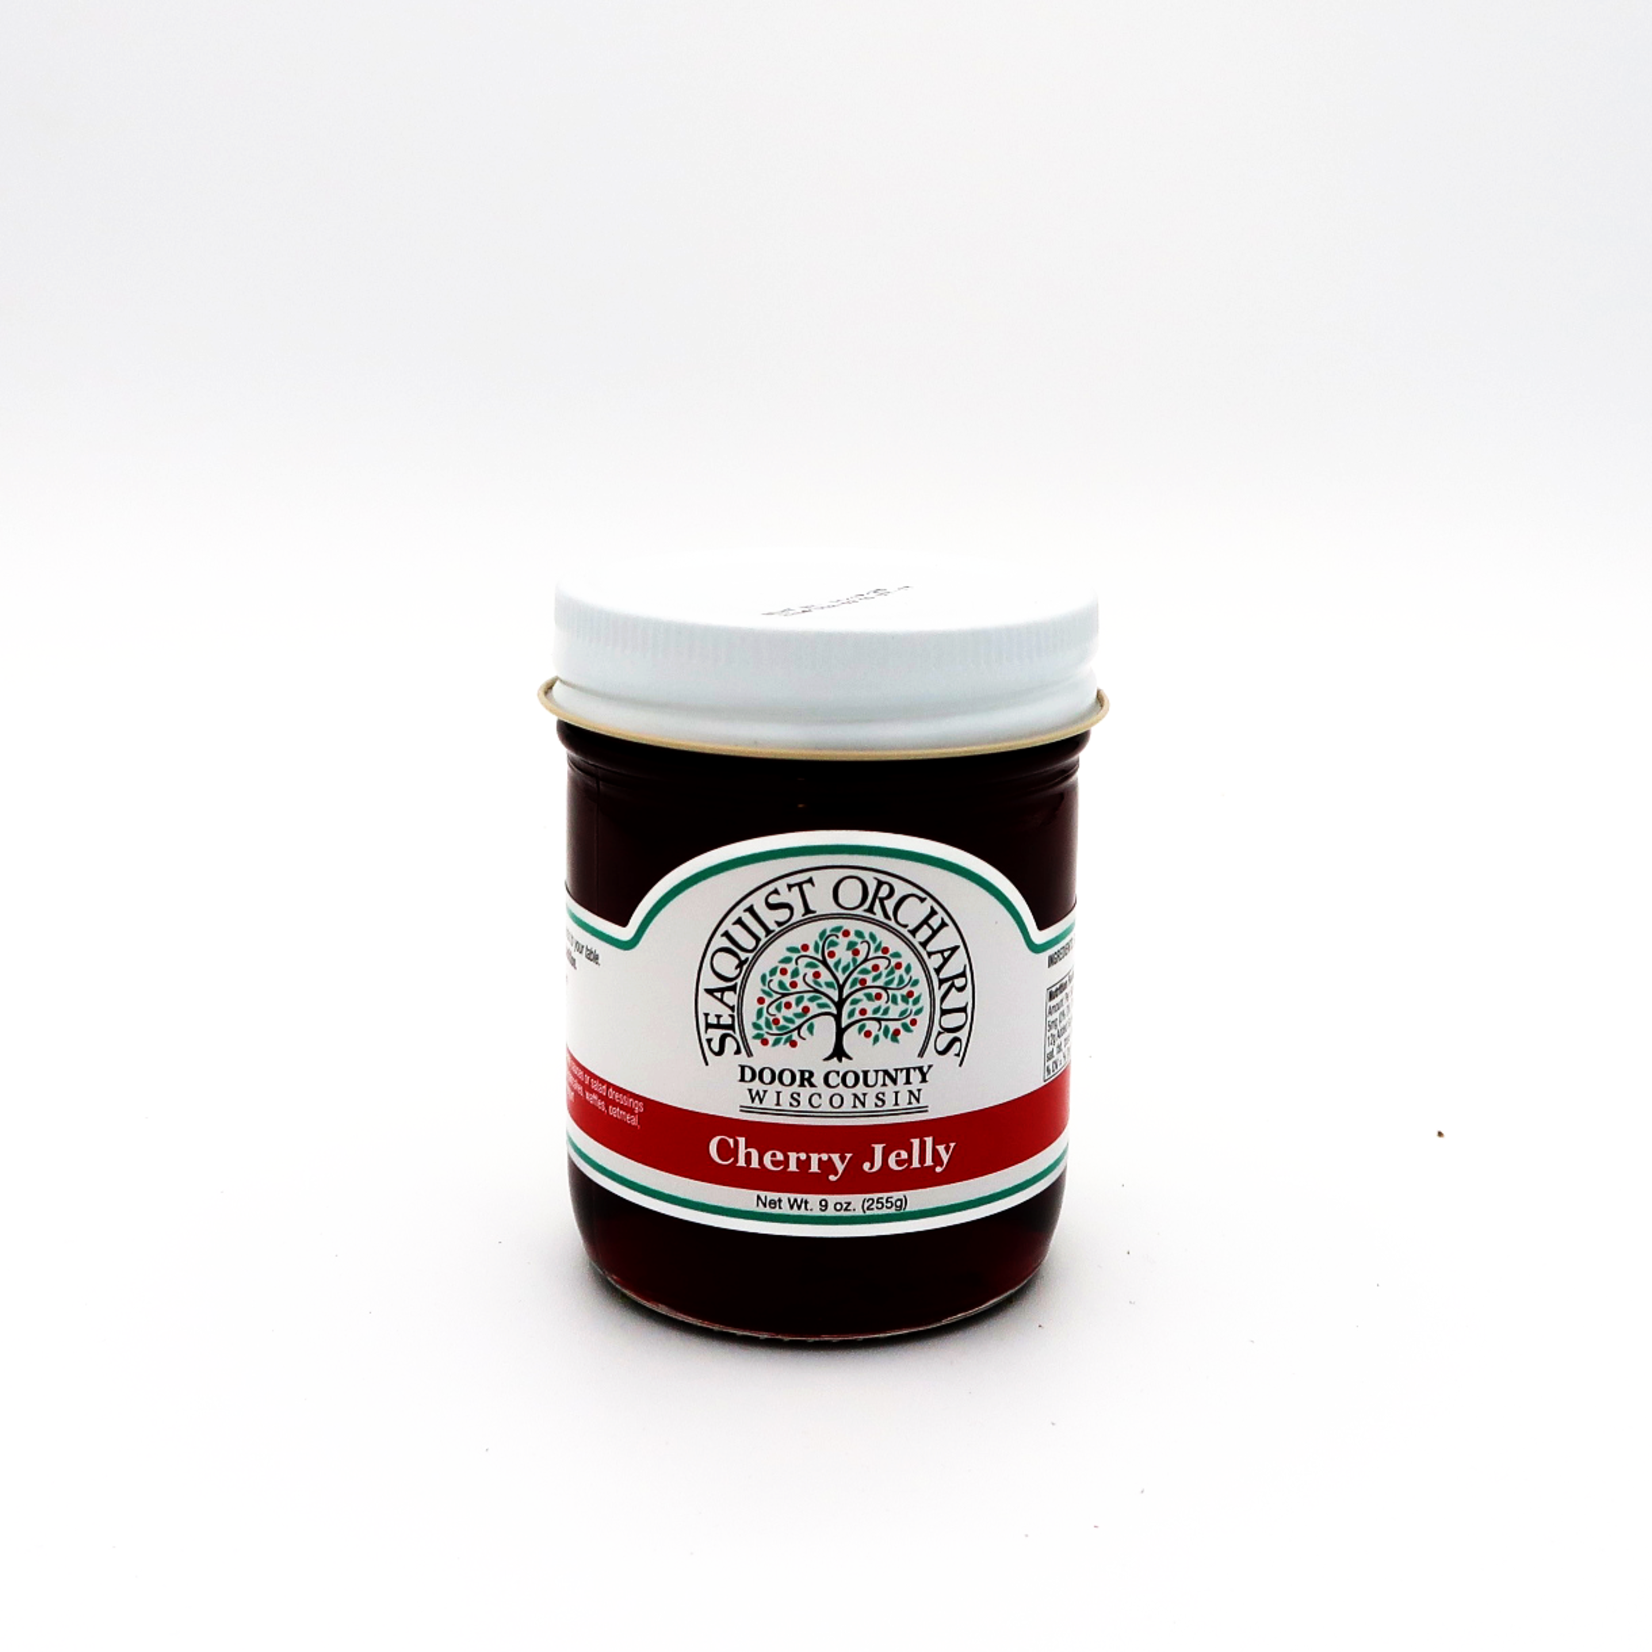 Seaquist Orchards Seaquist Orchard Cherry Jelly